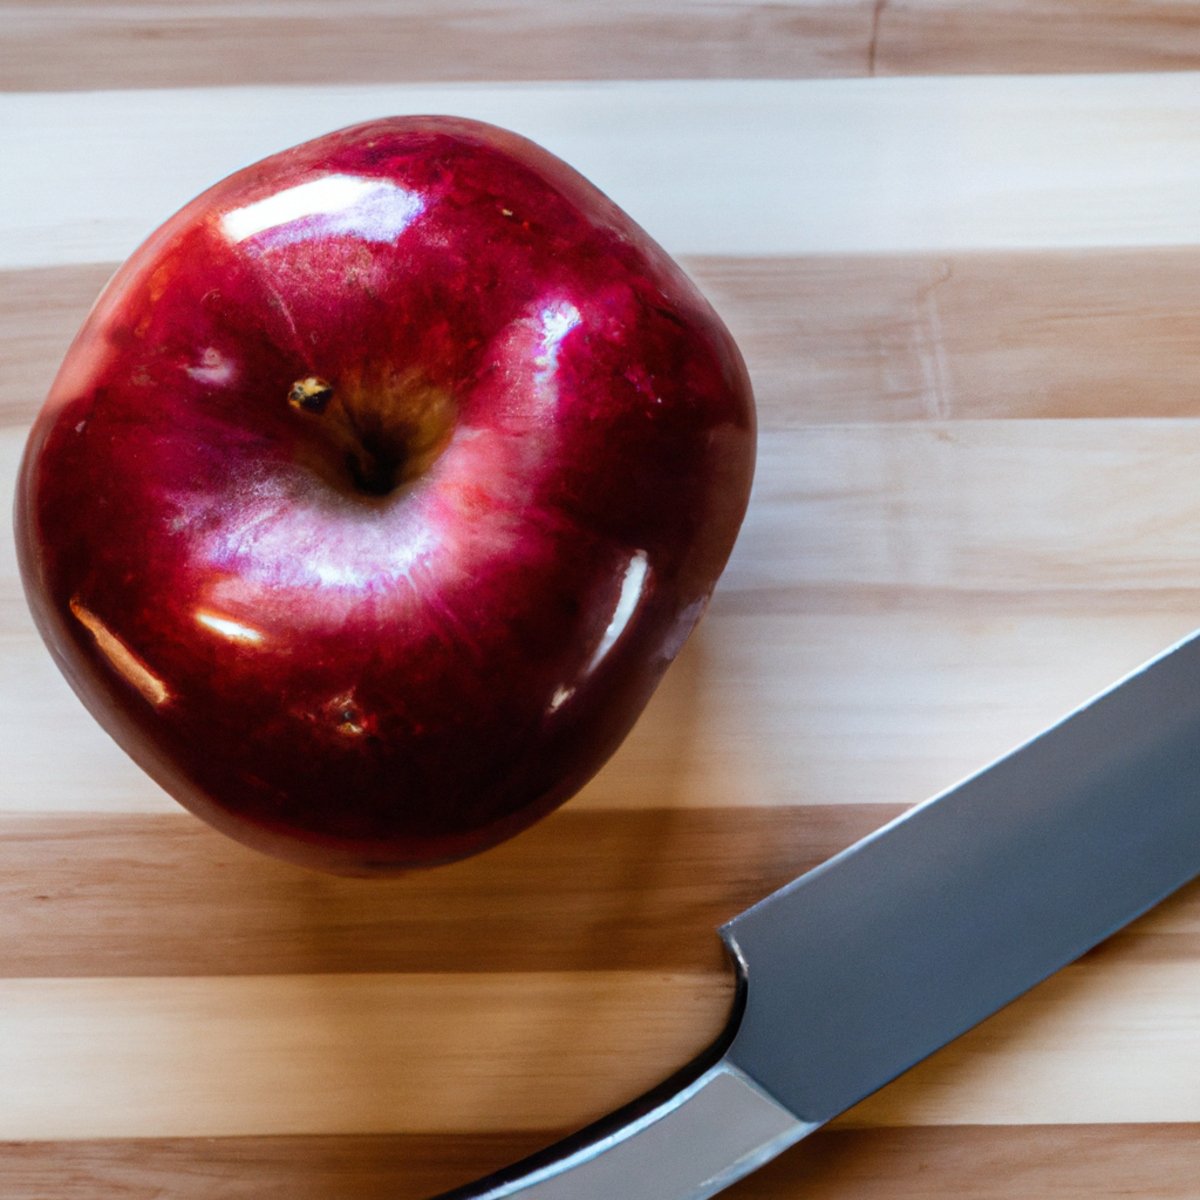 Vibrant red apple on cutting board with shiny knife, emphasizing healthy liver through iron-rich foods - Hemochromatosis